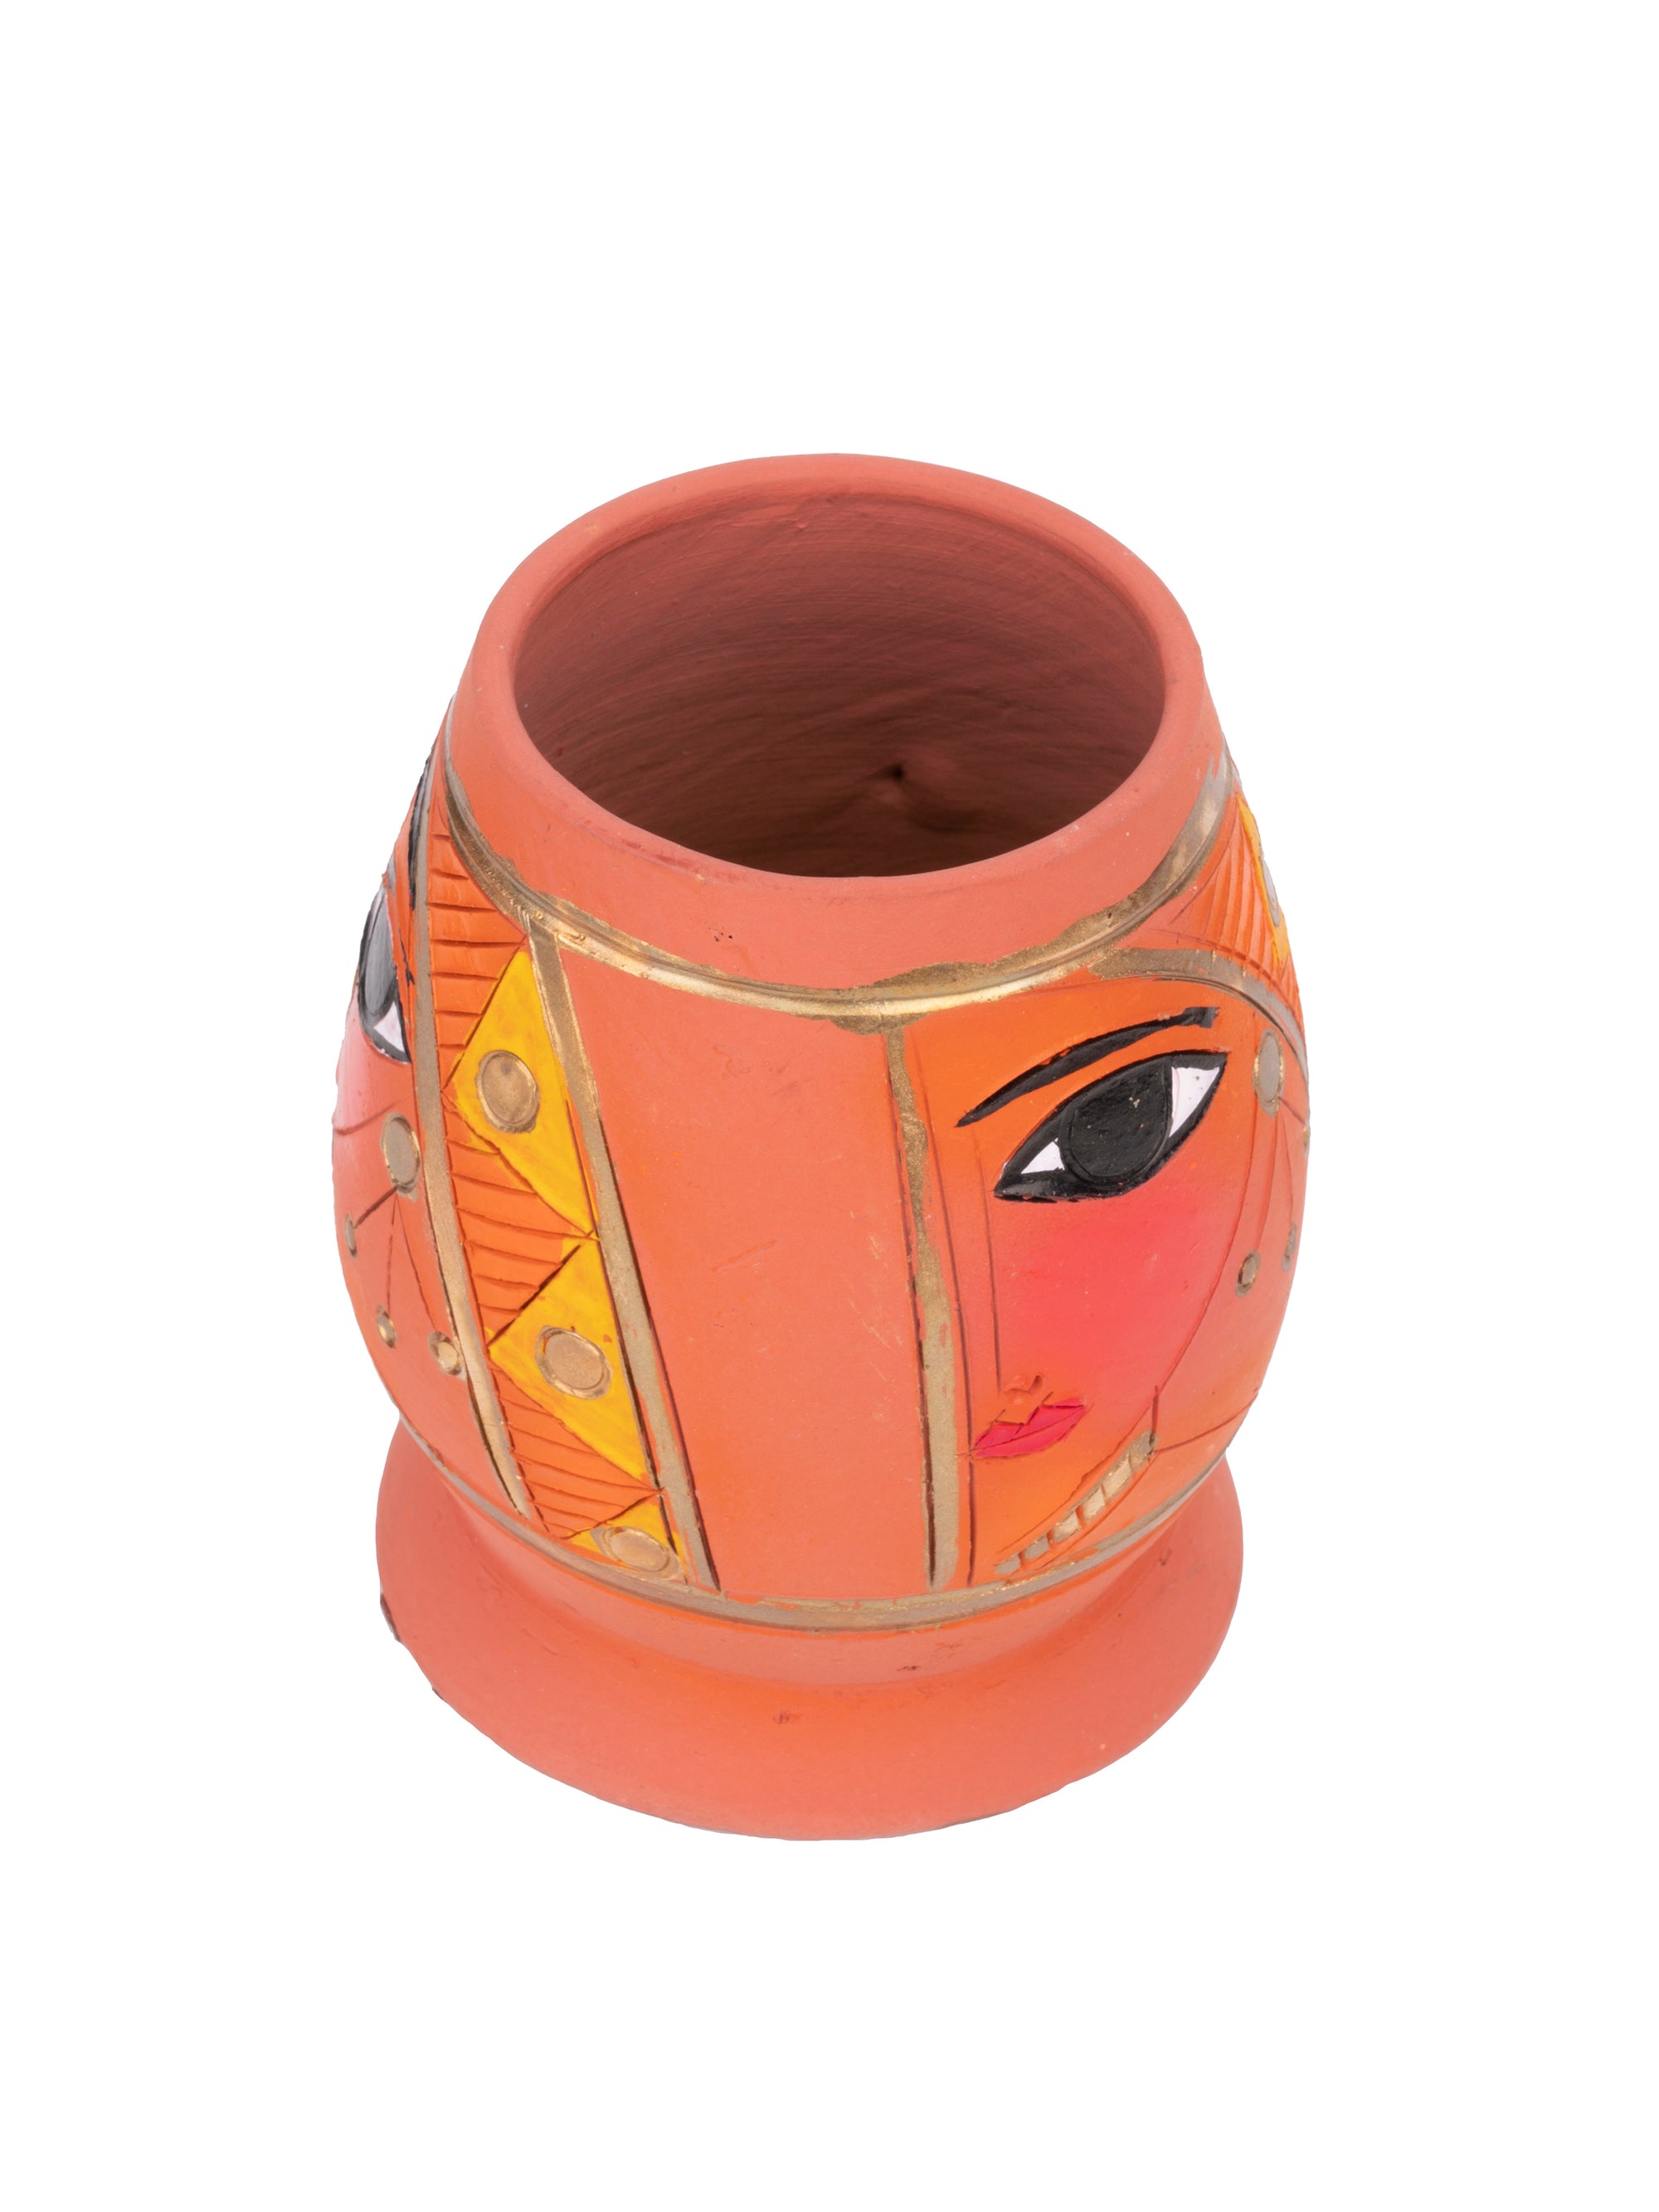 Terracotta Pen and Pencil Holder with Abstract Face Painting - 4 inches - The Heritage Artifacts